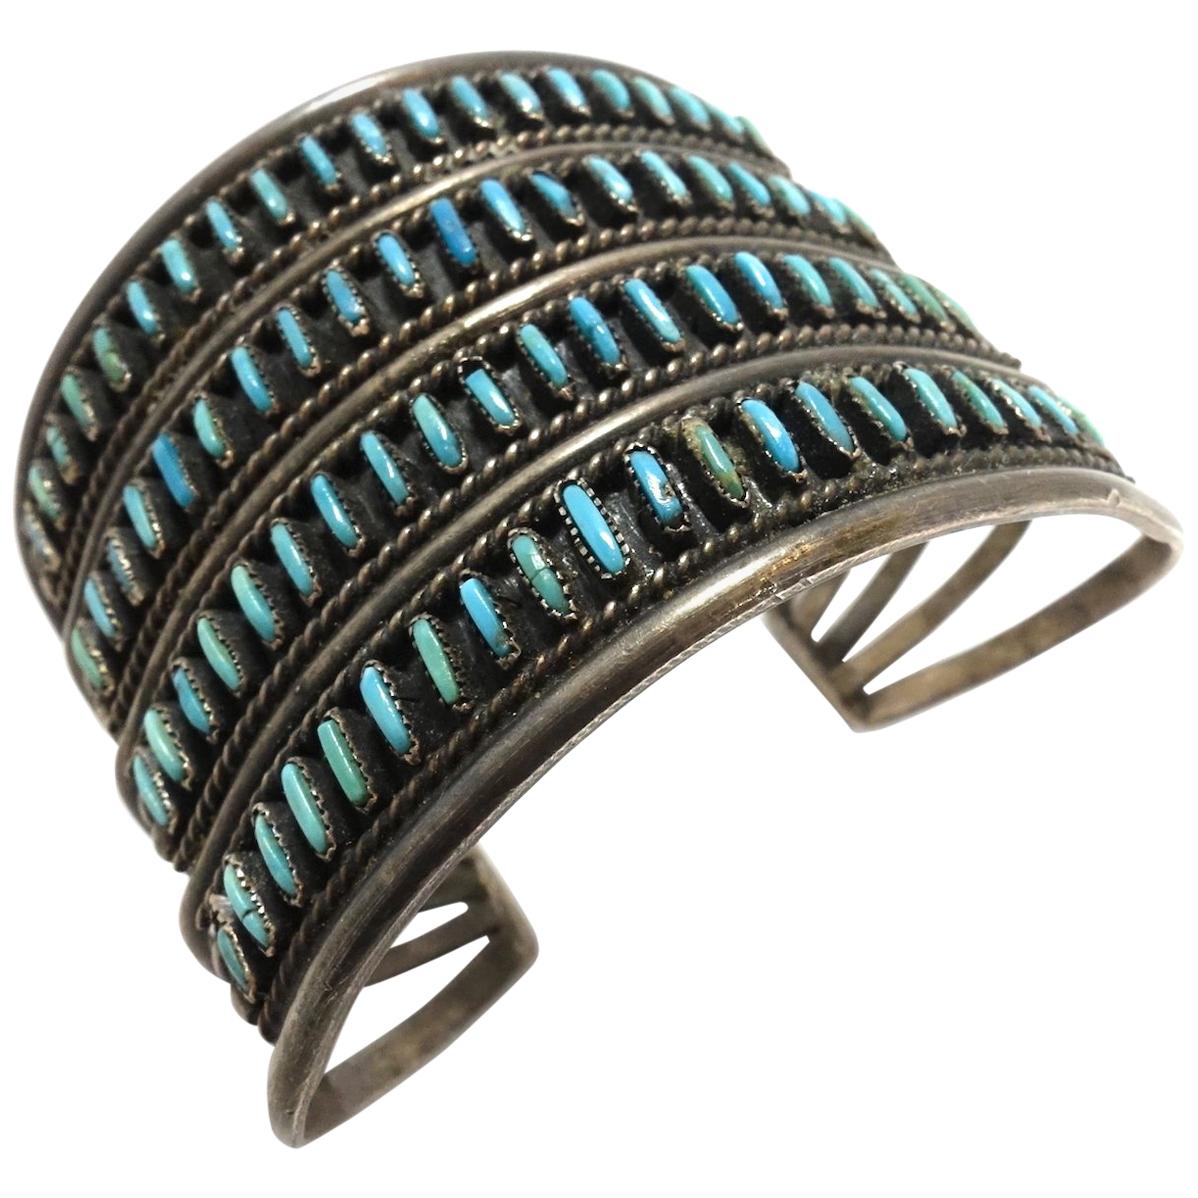 Vintage Zuni Pawn American Indian Needlepoint Turquoise & Sterling Cuff 